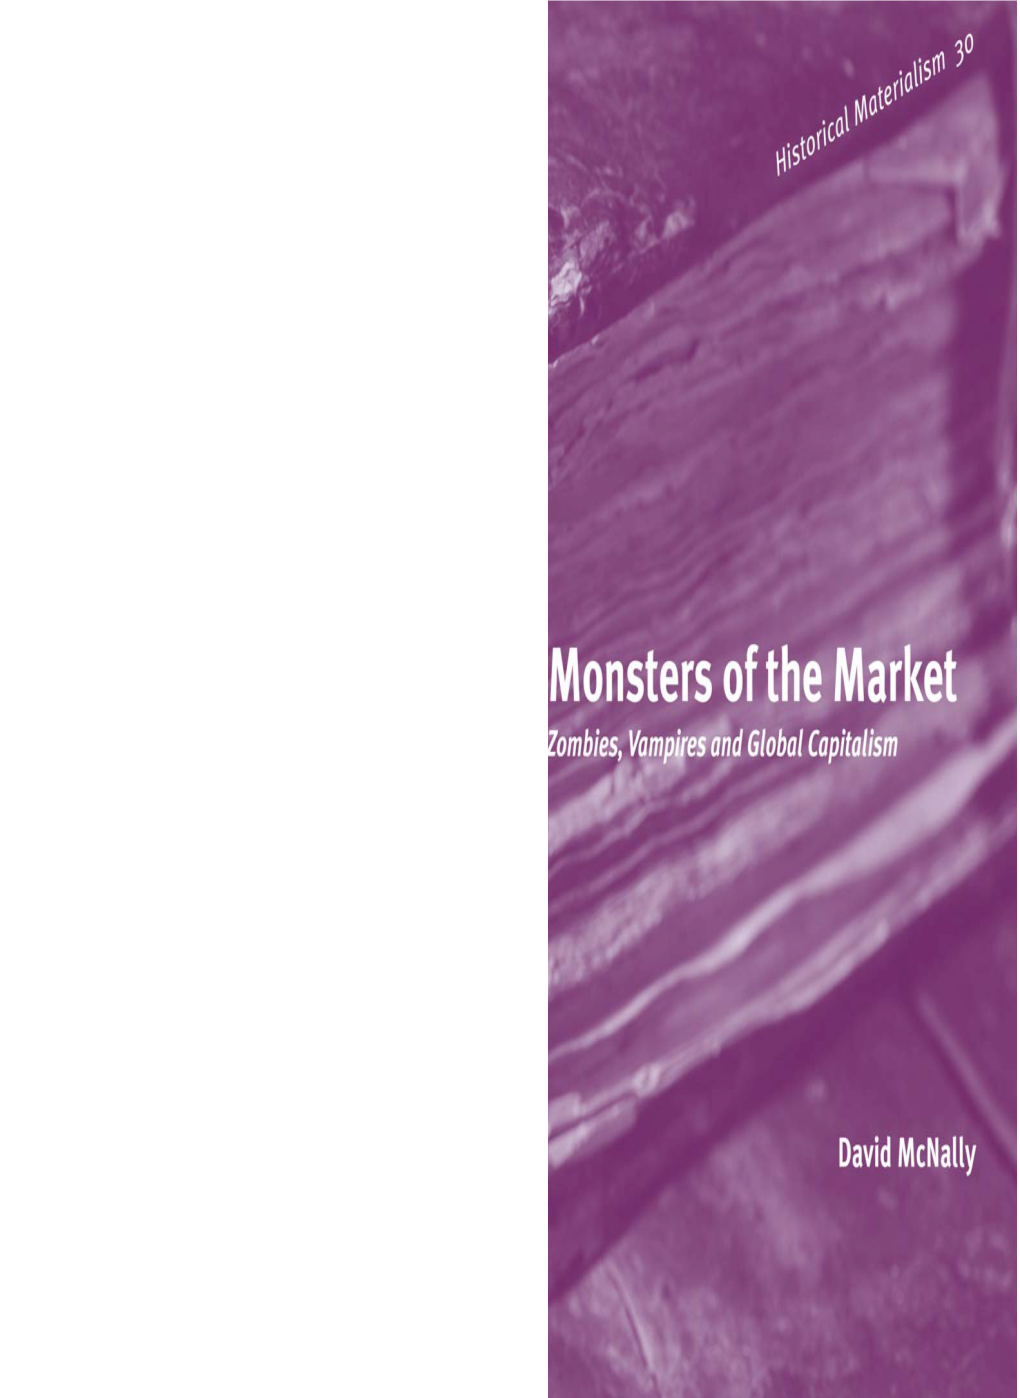 Monsters of the Market Contents